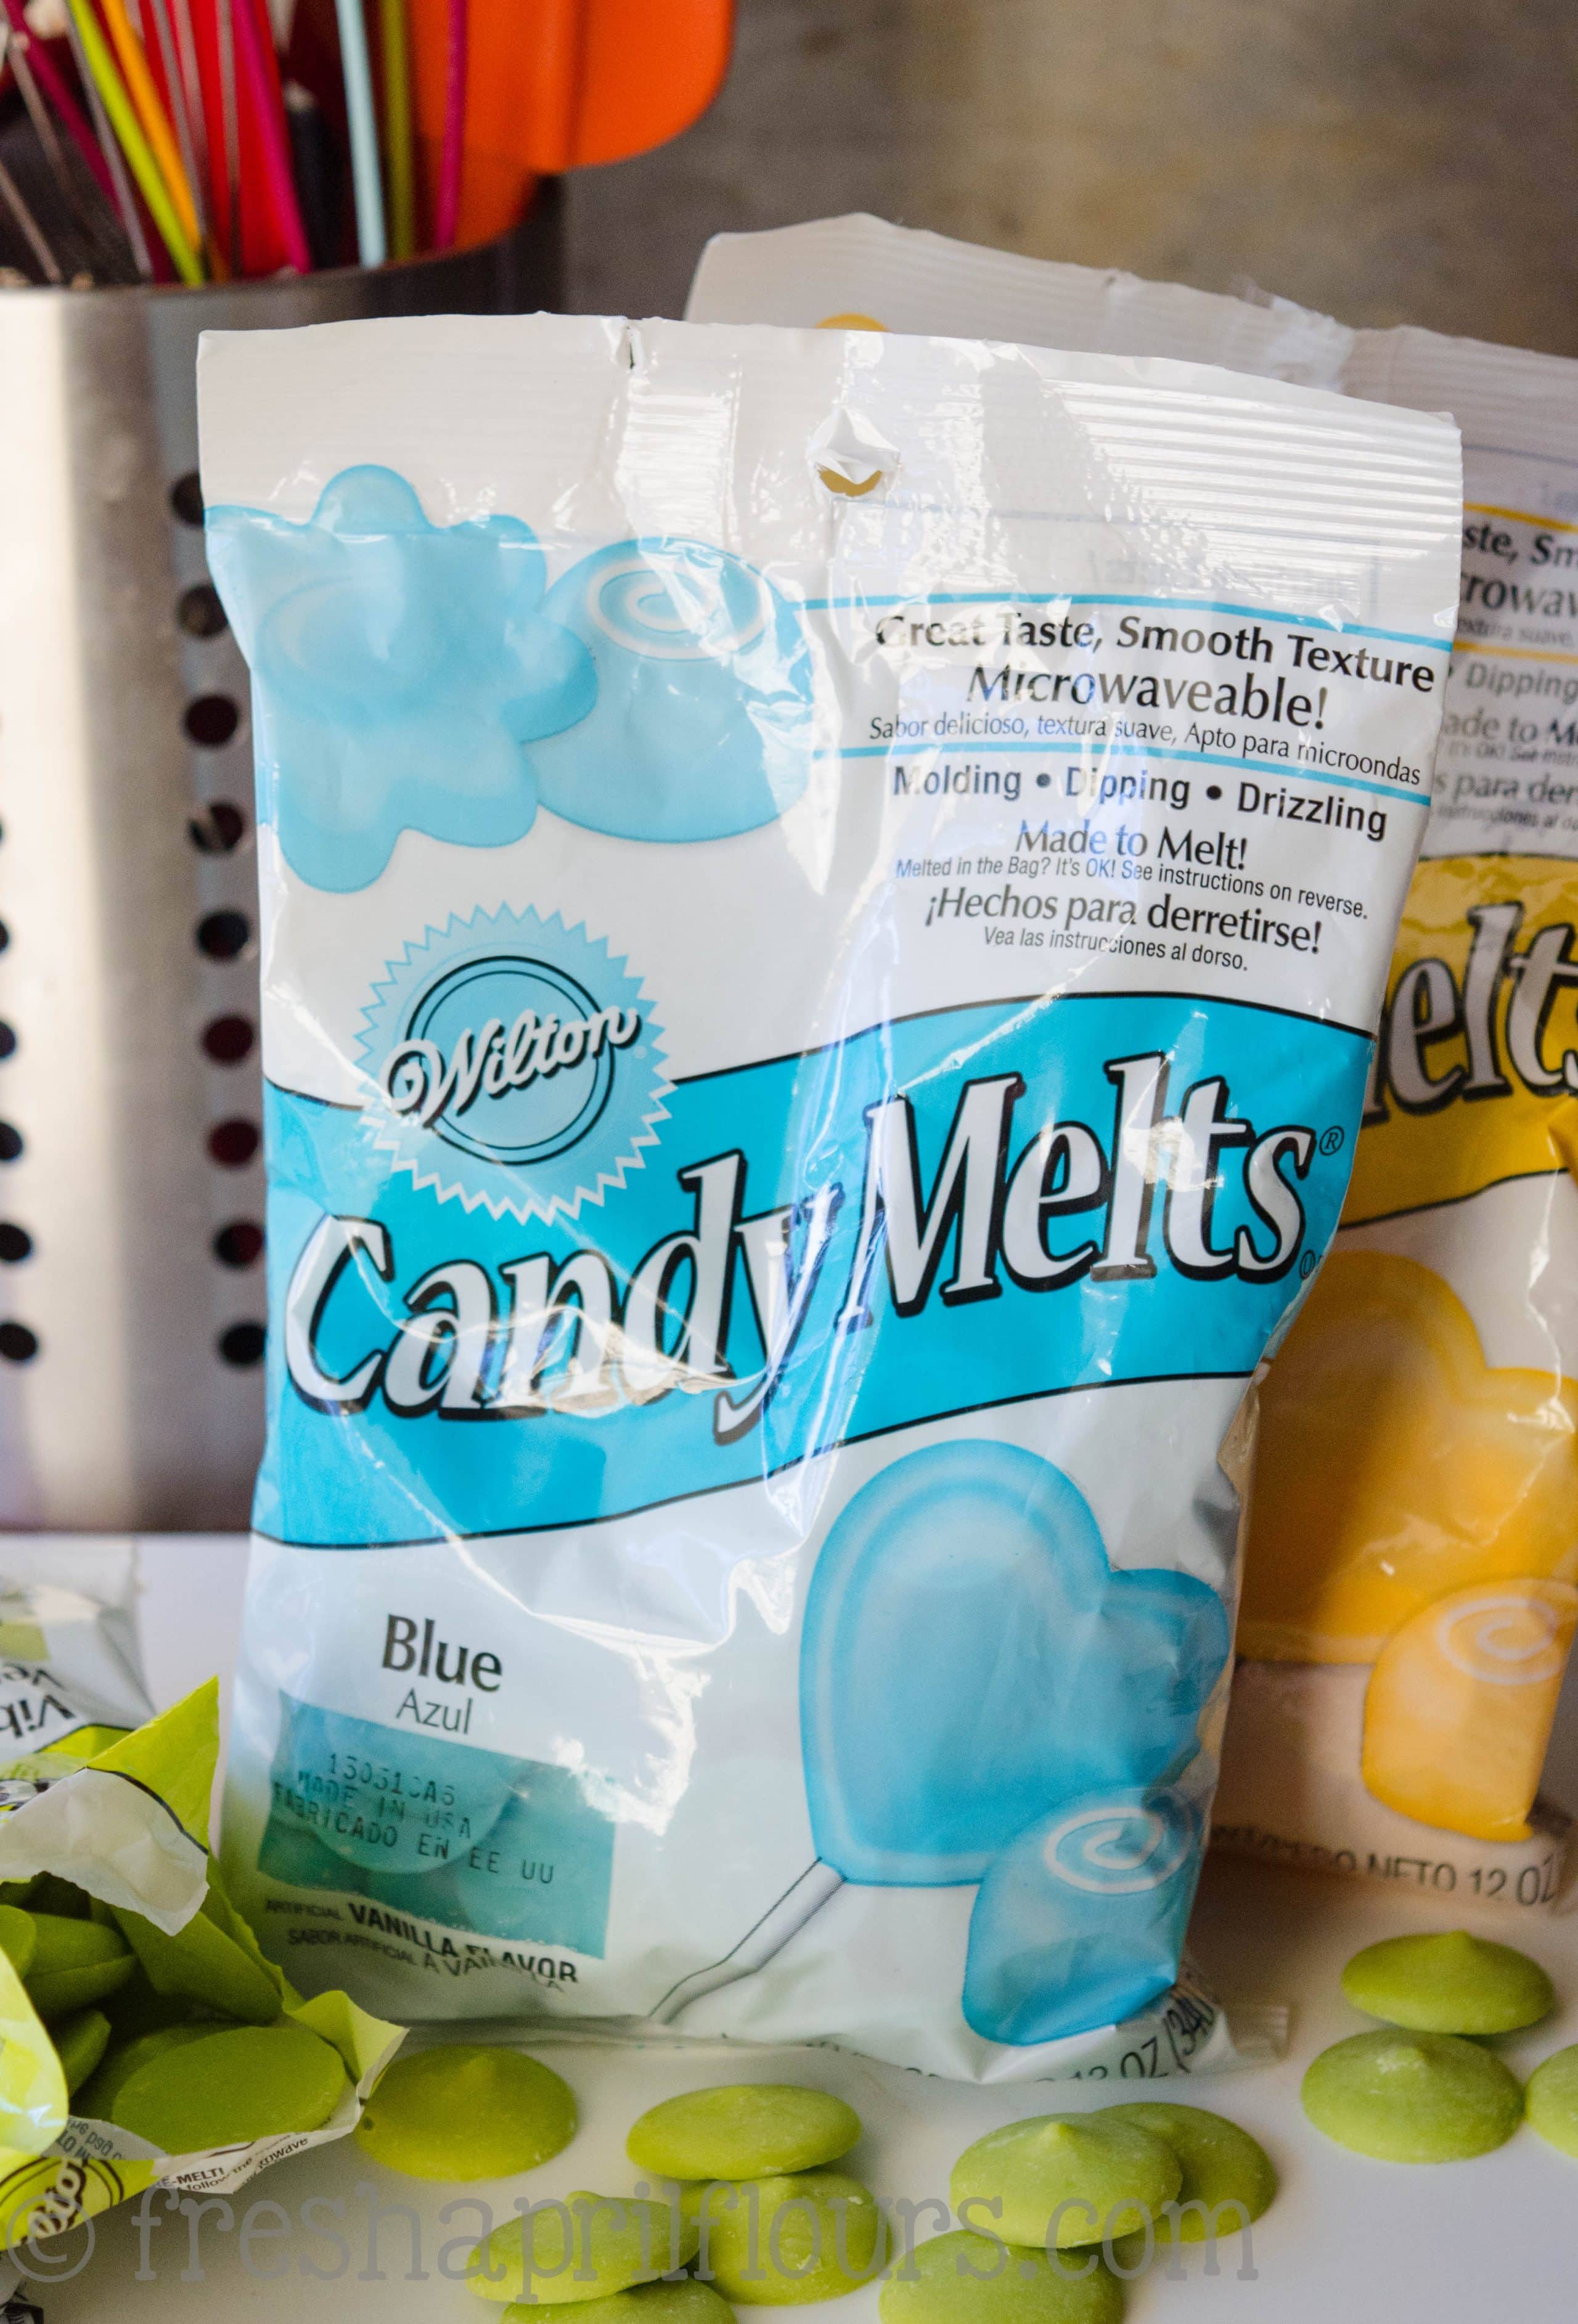 bag of candy melts